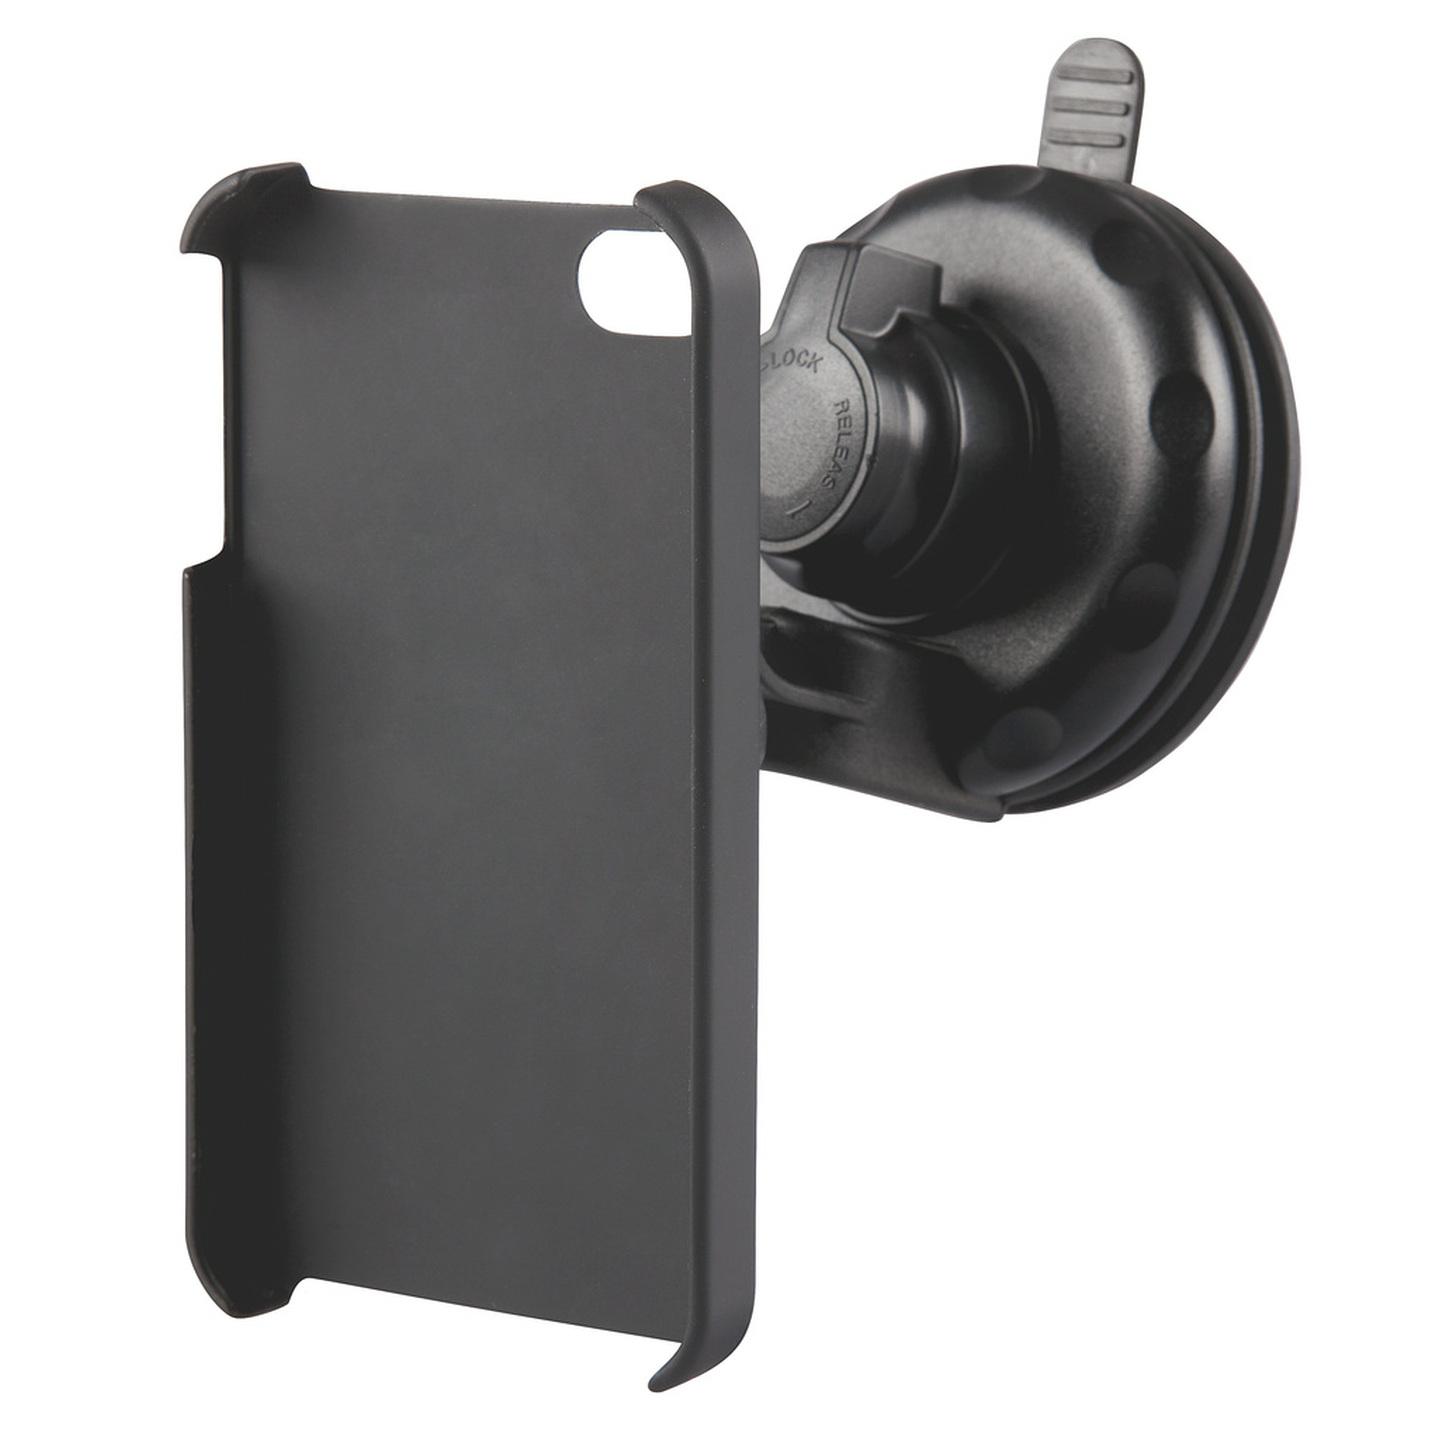 Universal Suction Mount Bracket for Mobiles & iPhone 3G/3GS/4/4S